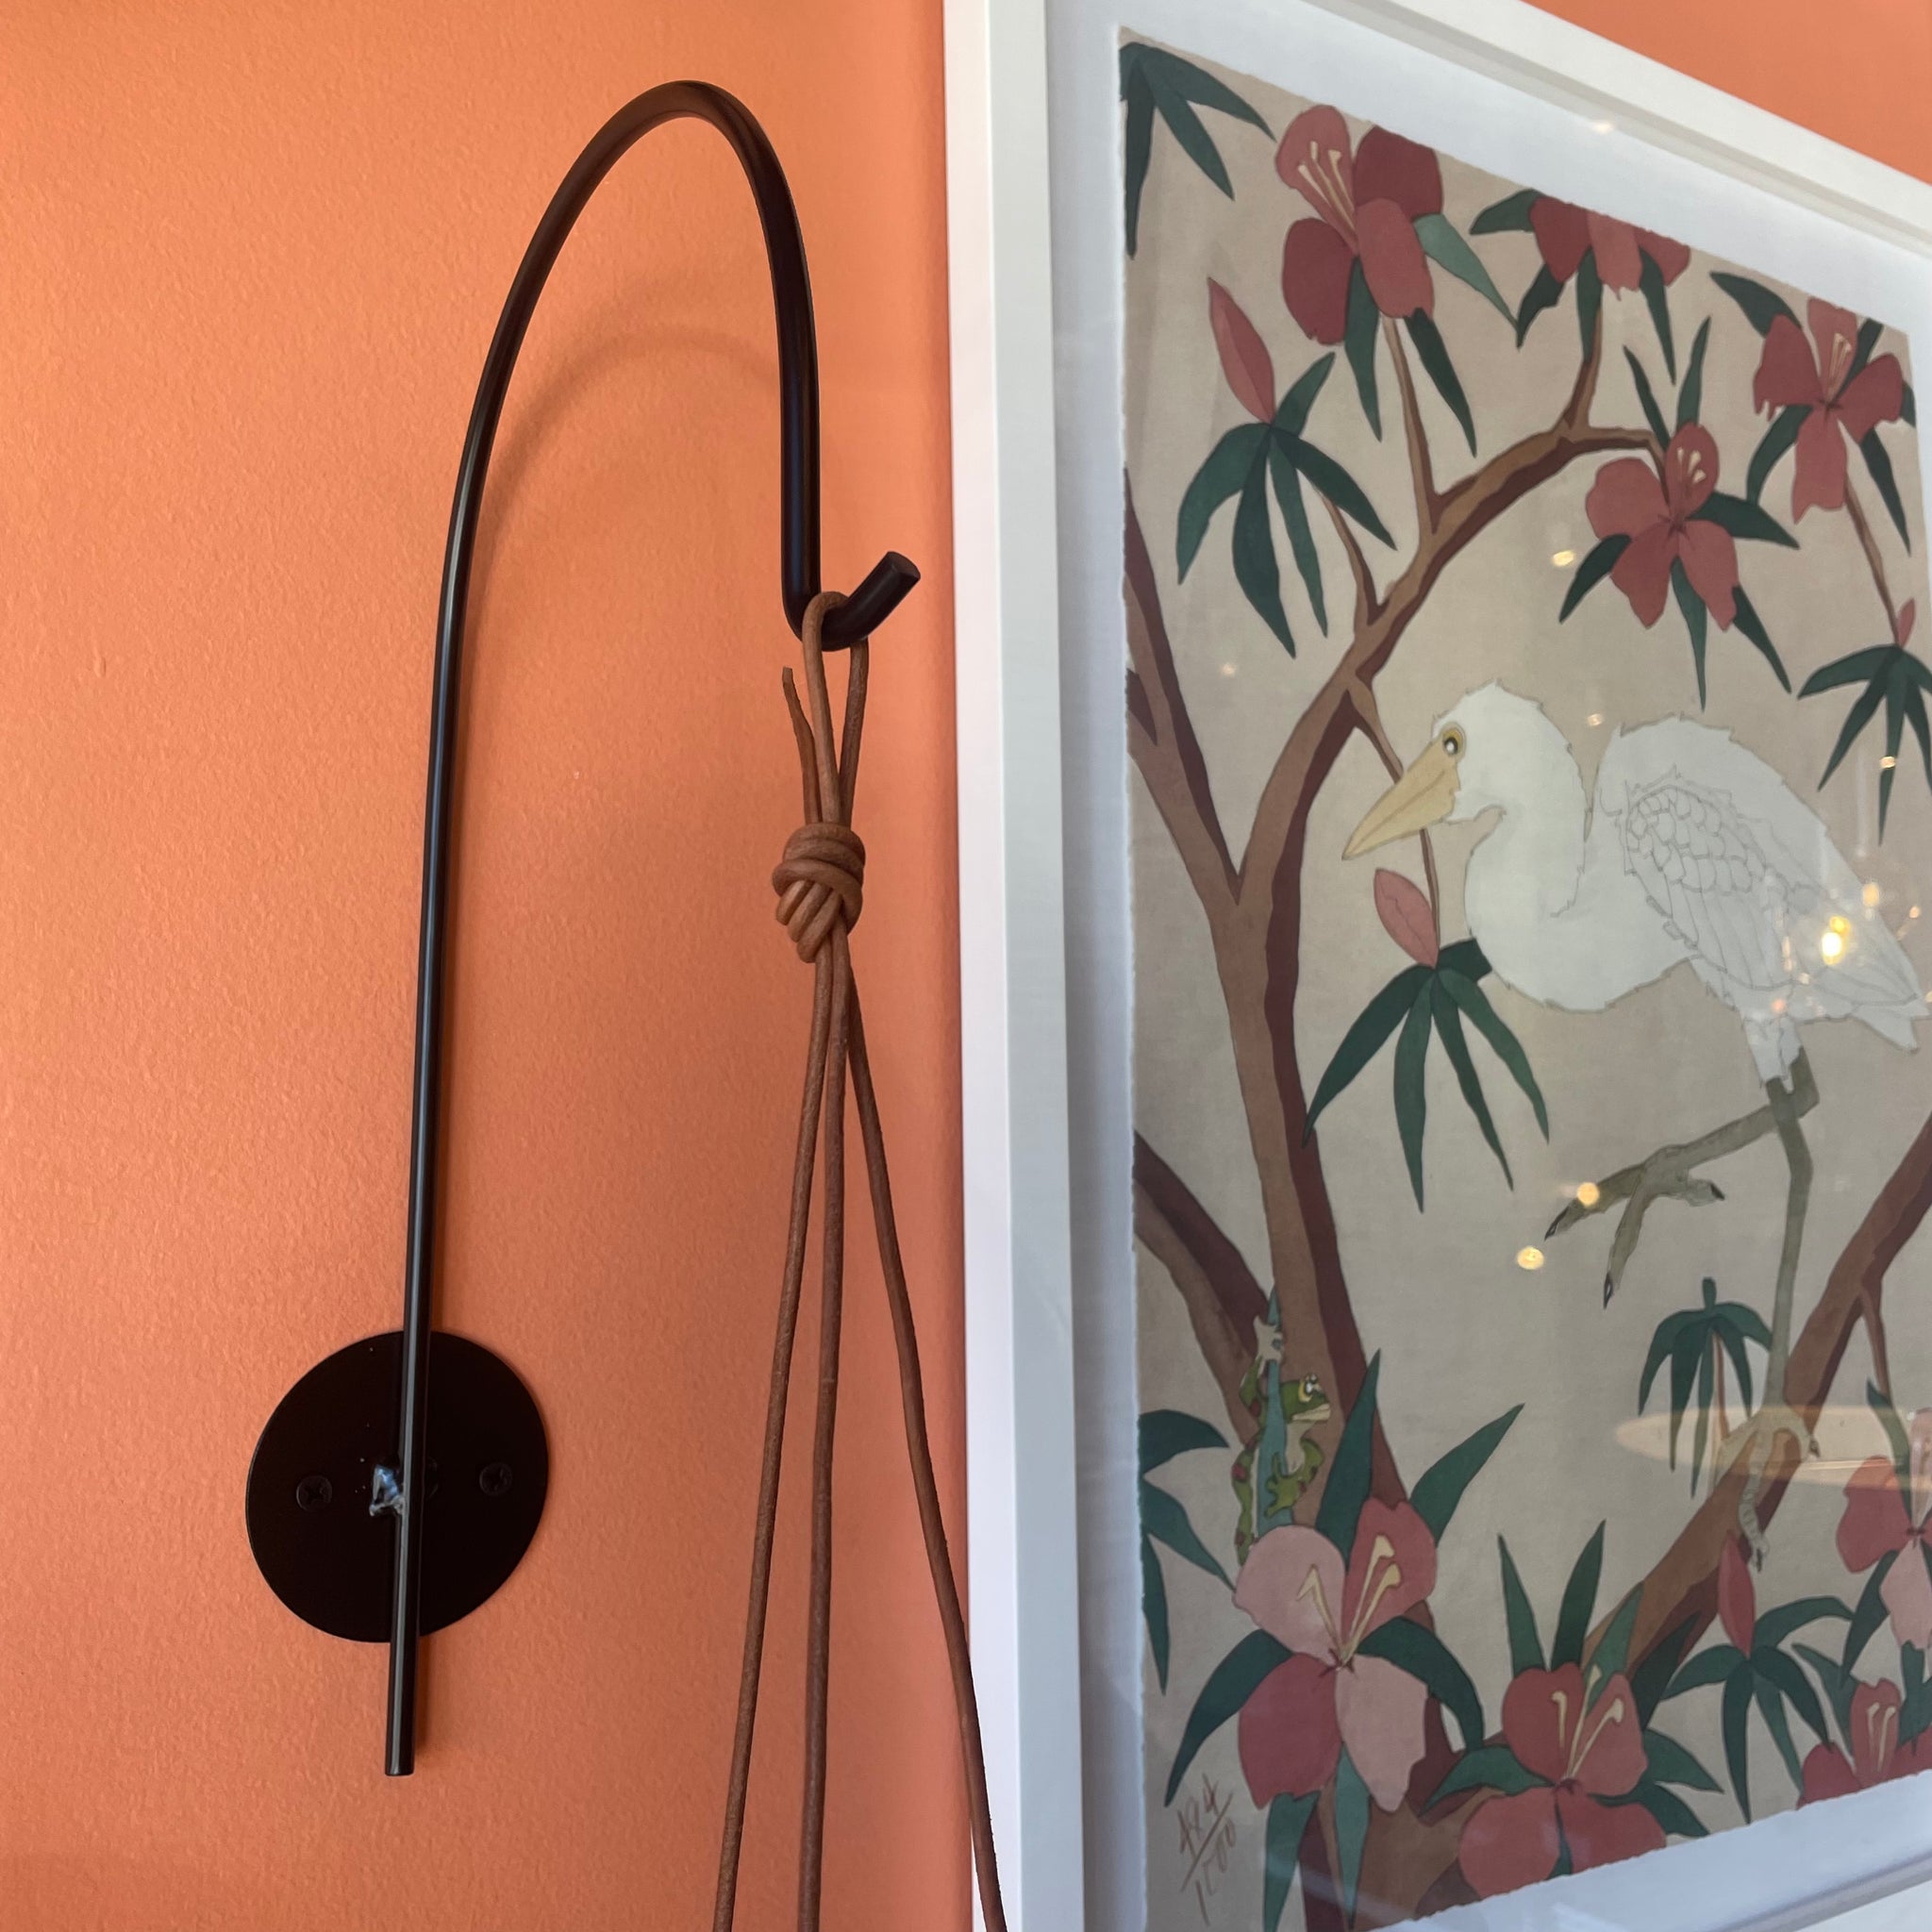 Single Wall Hook by New Made LA  CANDID HOME   